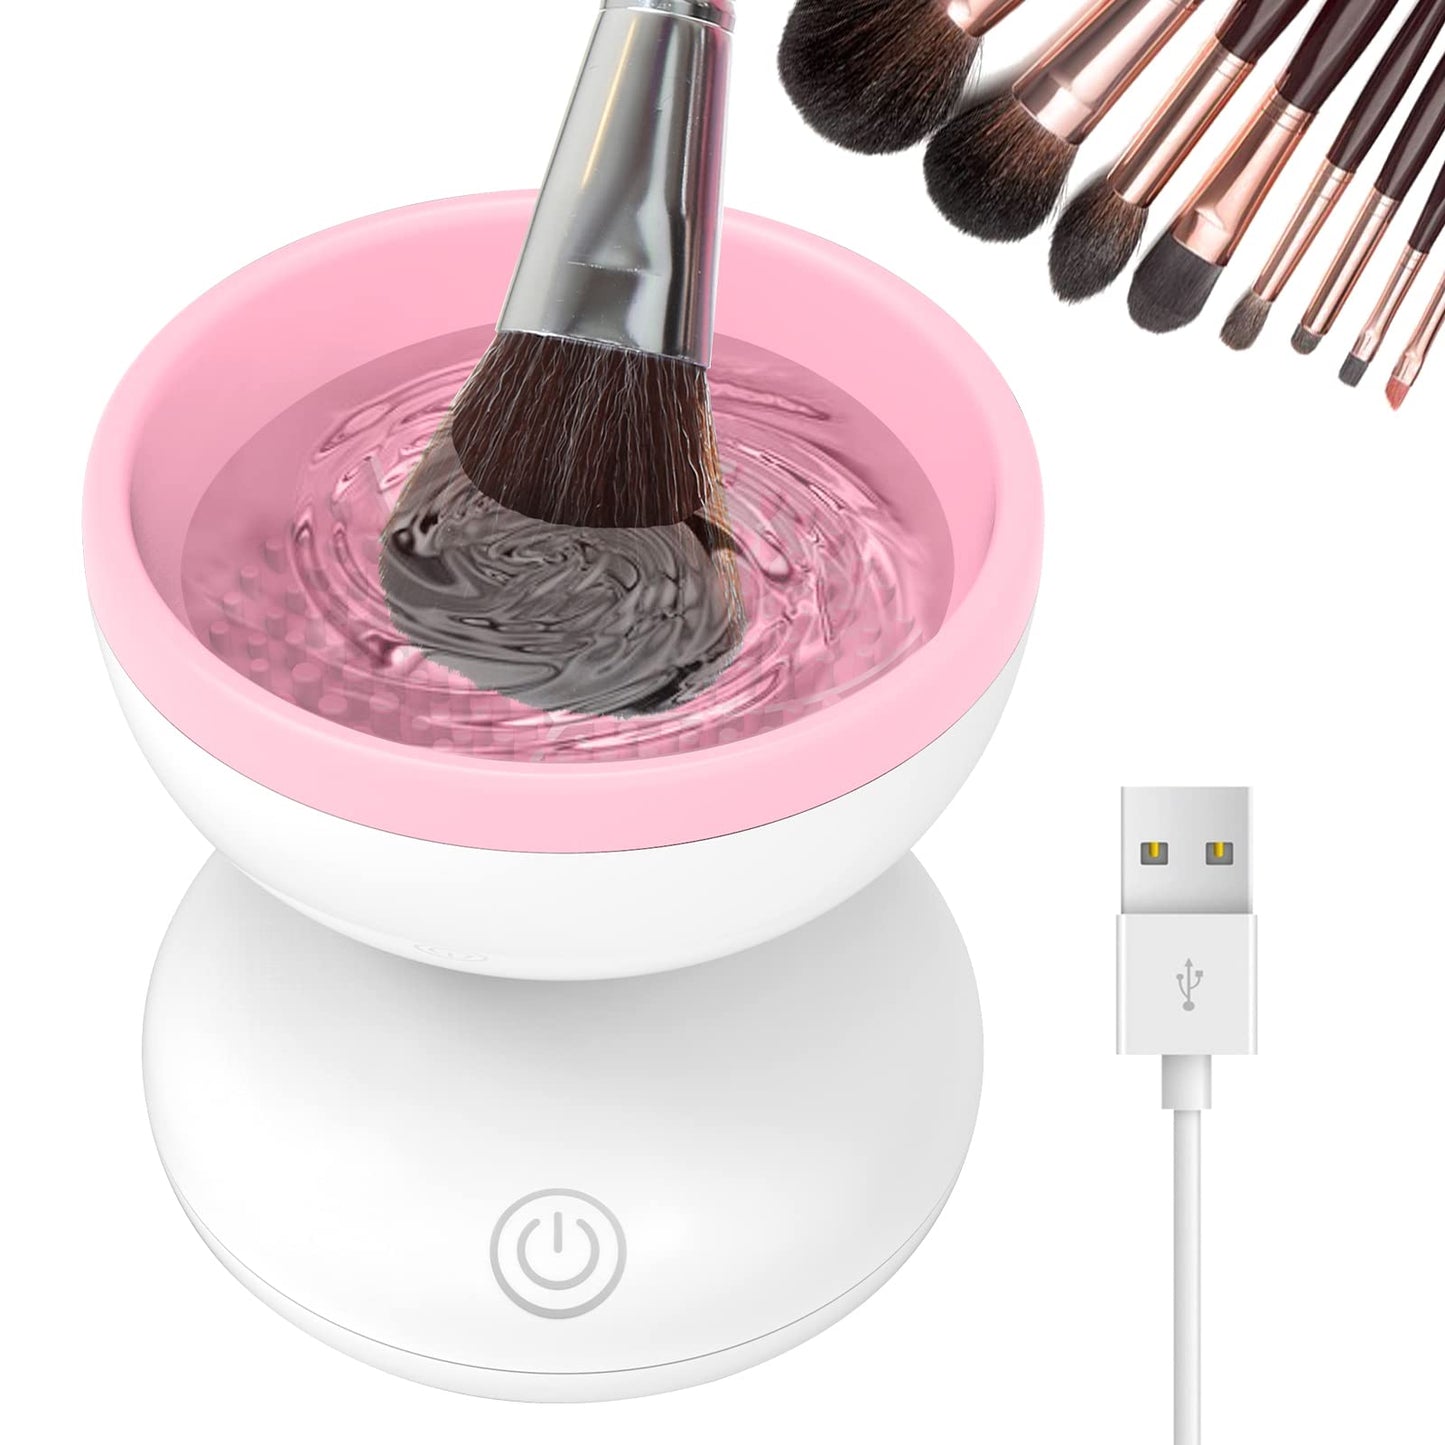 Luxe Electric Makeup Brush Cleaner, Pink, USB Charging Station, 3  Adjustable Speeds, Cleaner to Instantly Wash and Dry Your Makeup Brushes